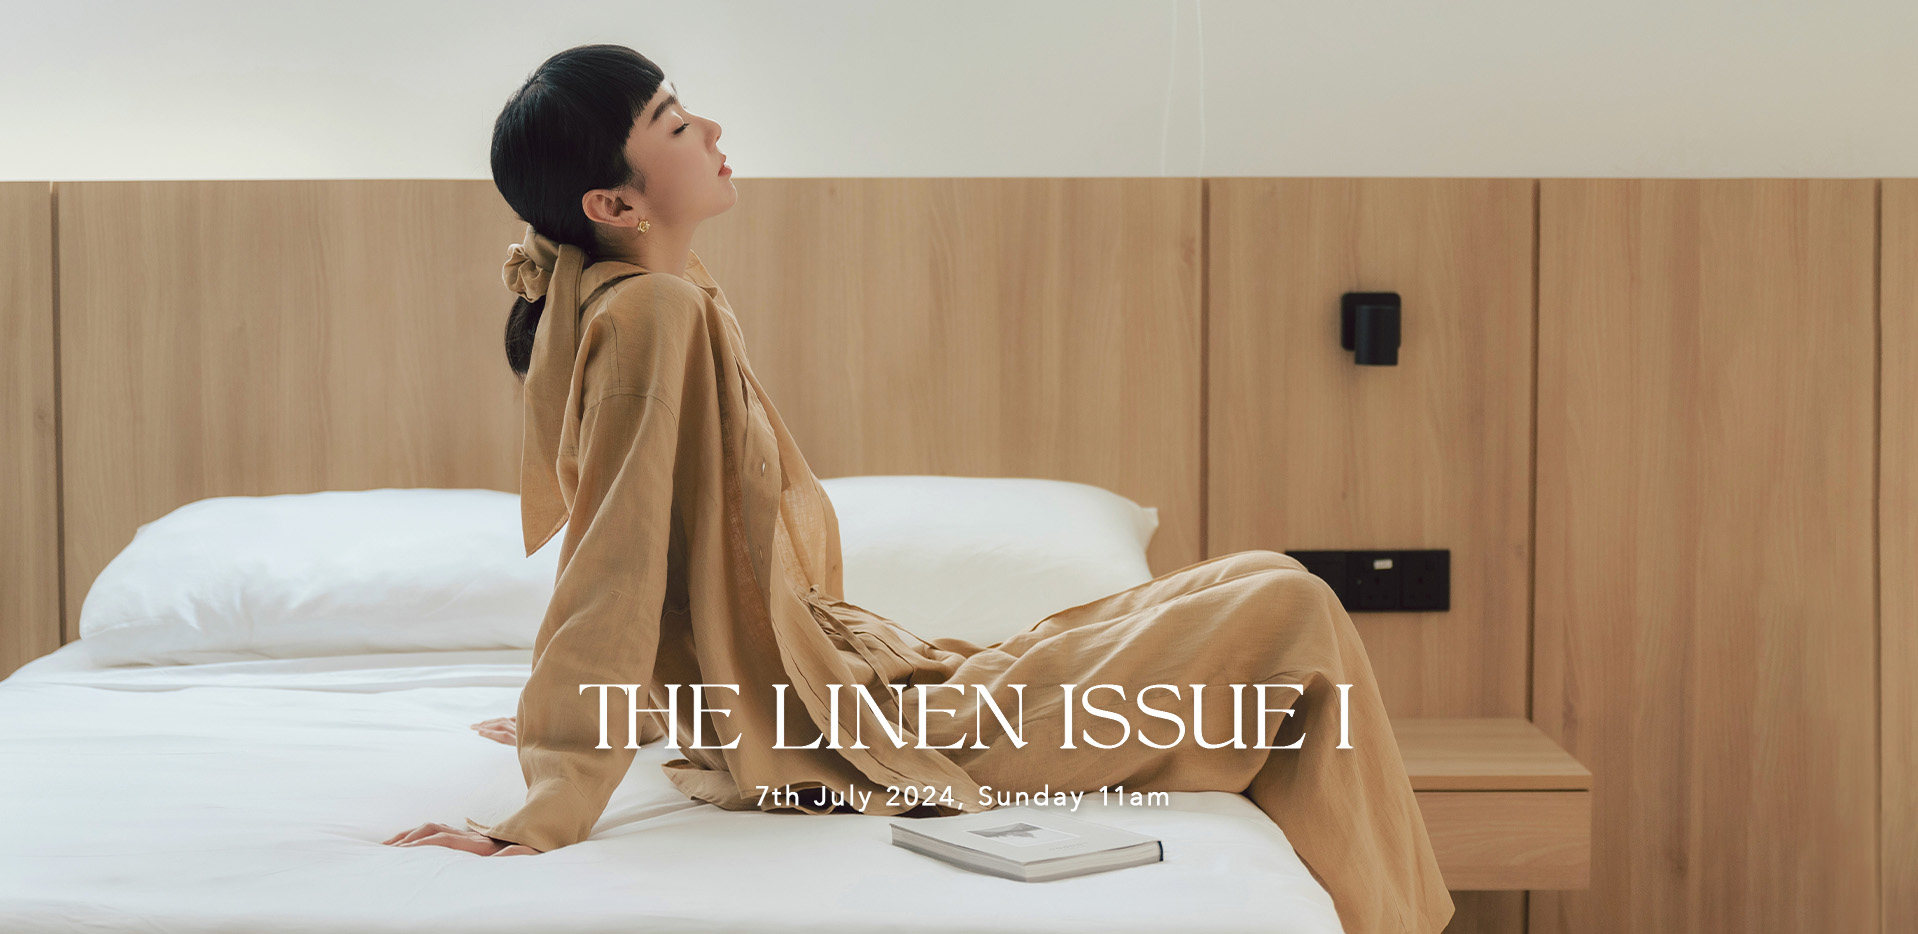 THE LINEN ISSUE I